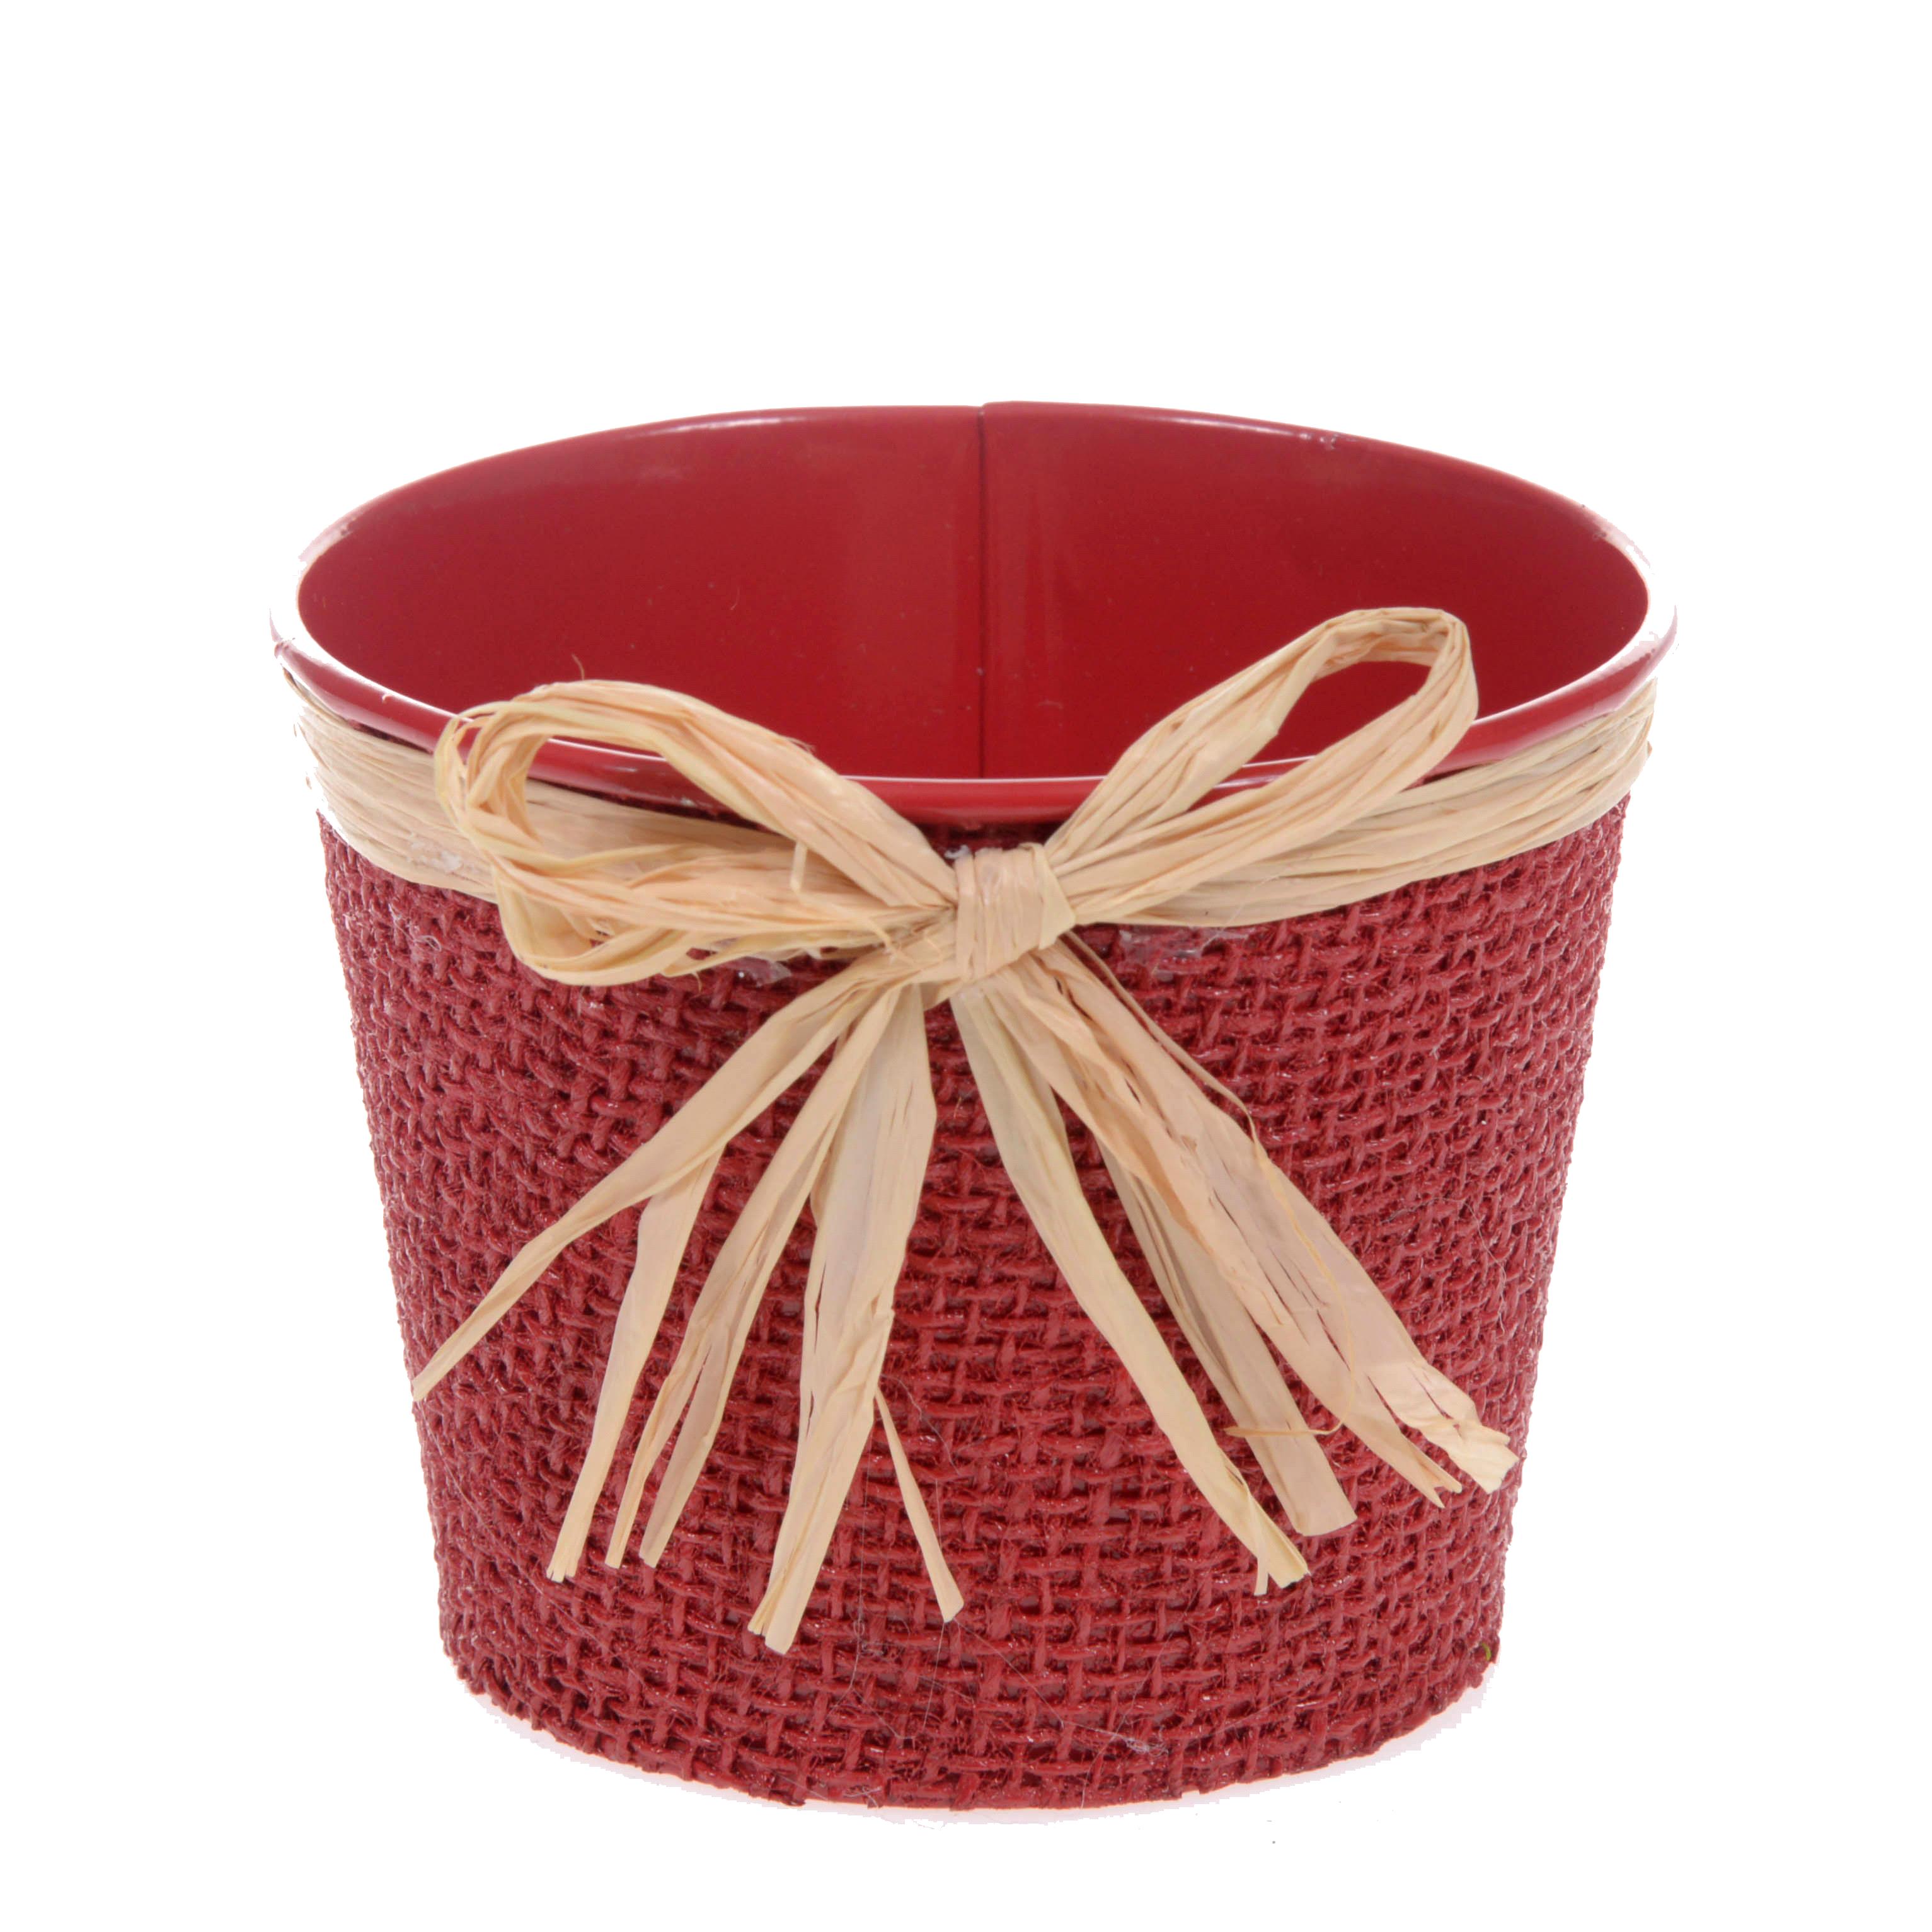 CHRISTMAS ITEMS, BOXES, BASKETS,DISHES, VARIOUS BAGS AND CONTAINERS, CACHEPOT 13,5 CM C/FIOCCO JUTA